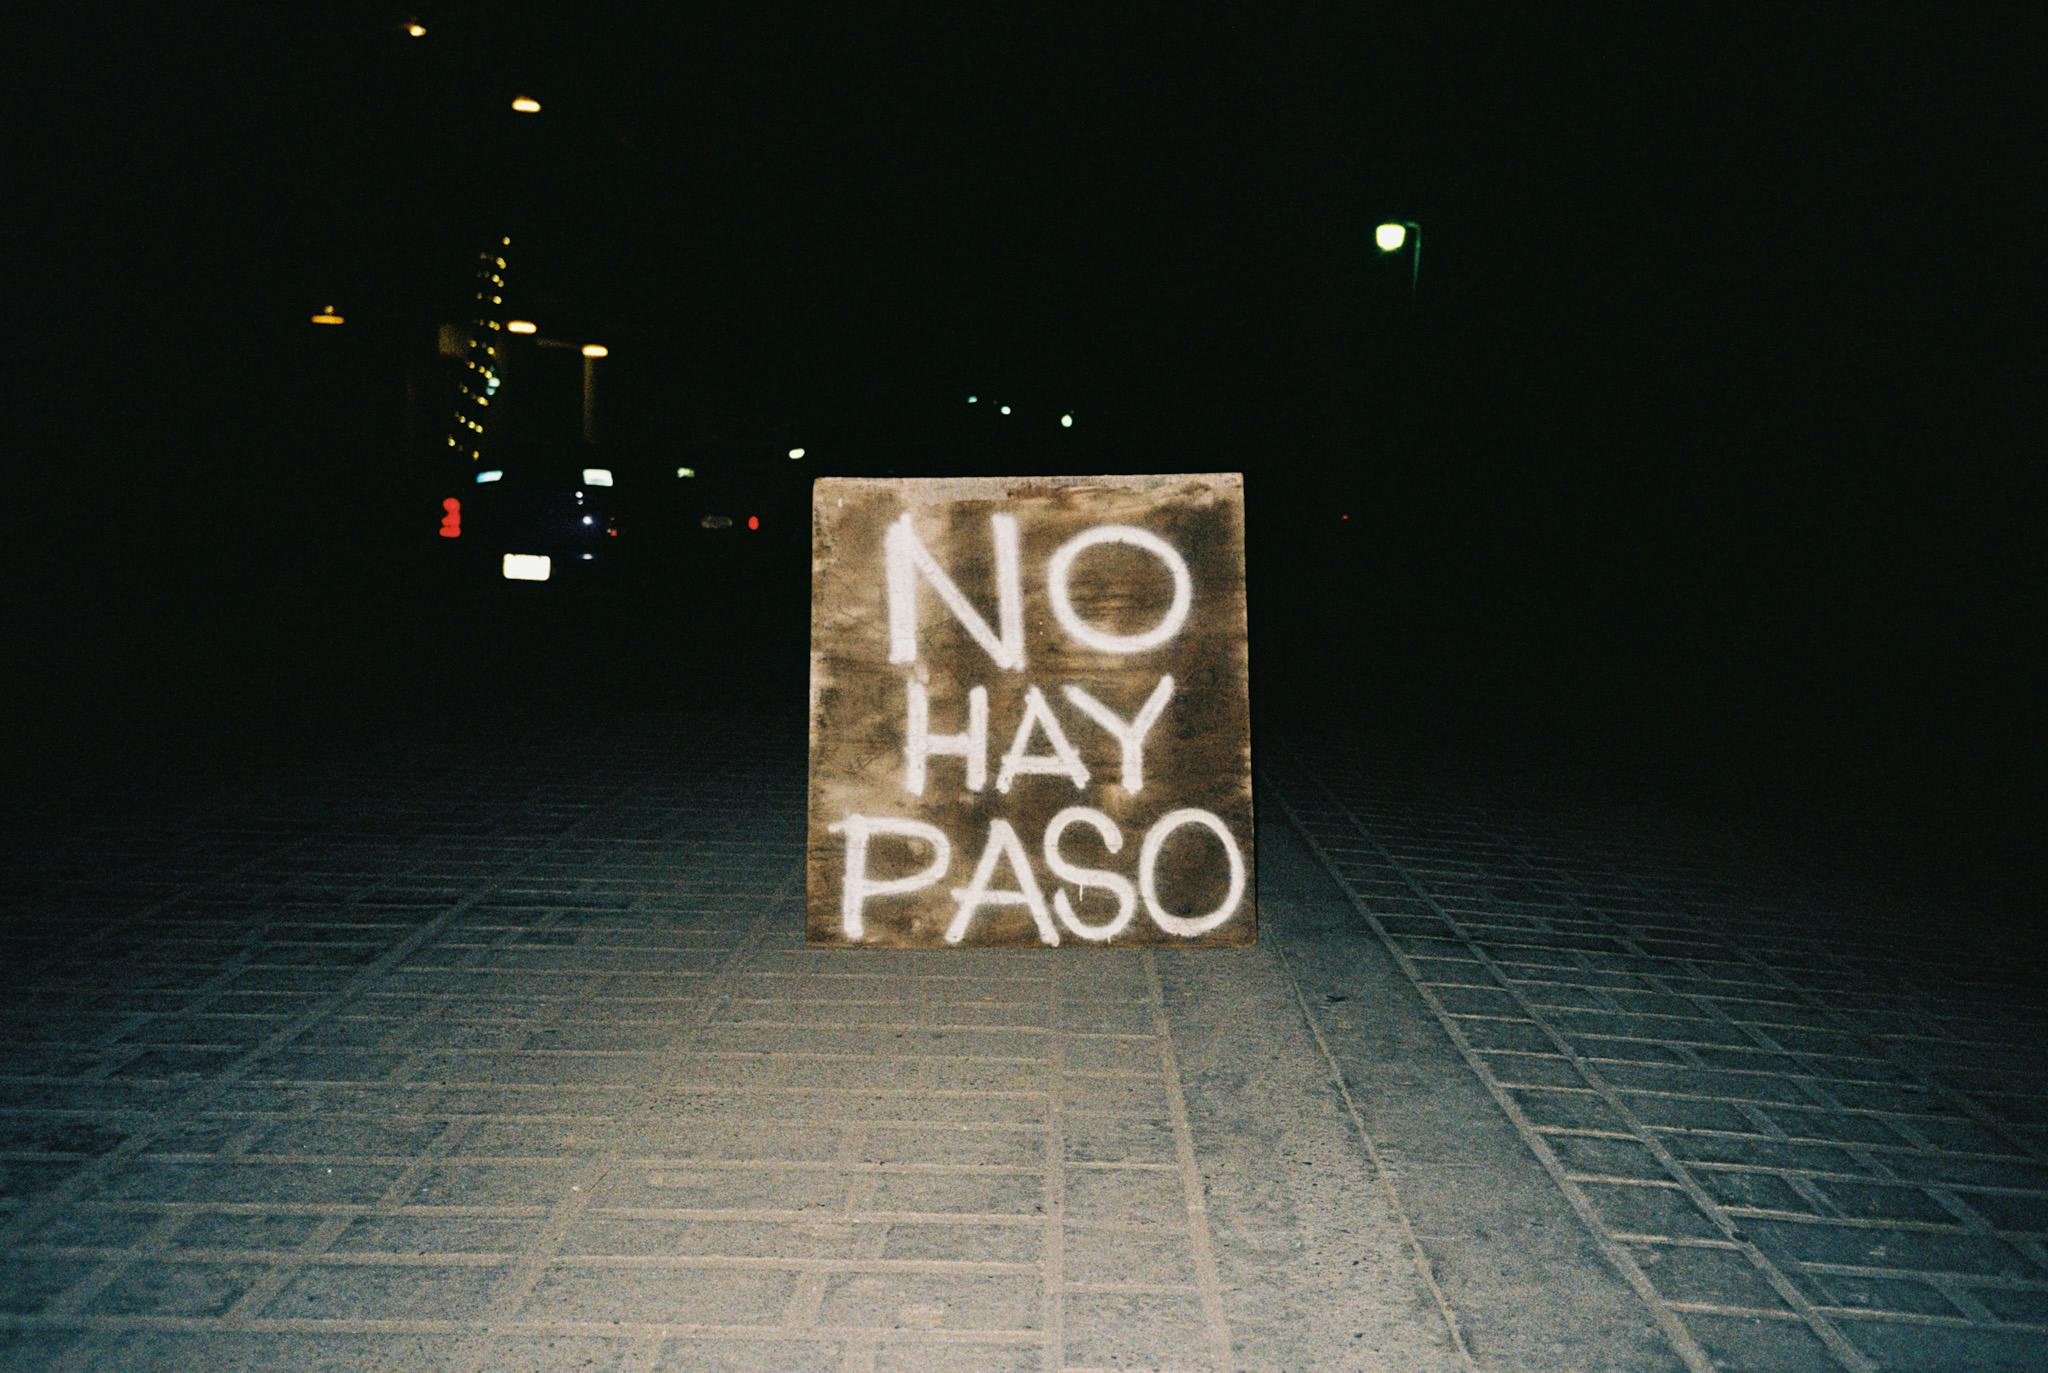 No hay paso written in a sign